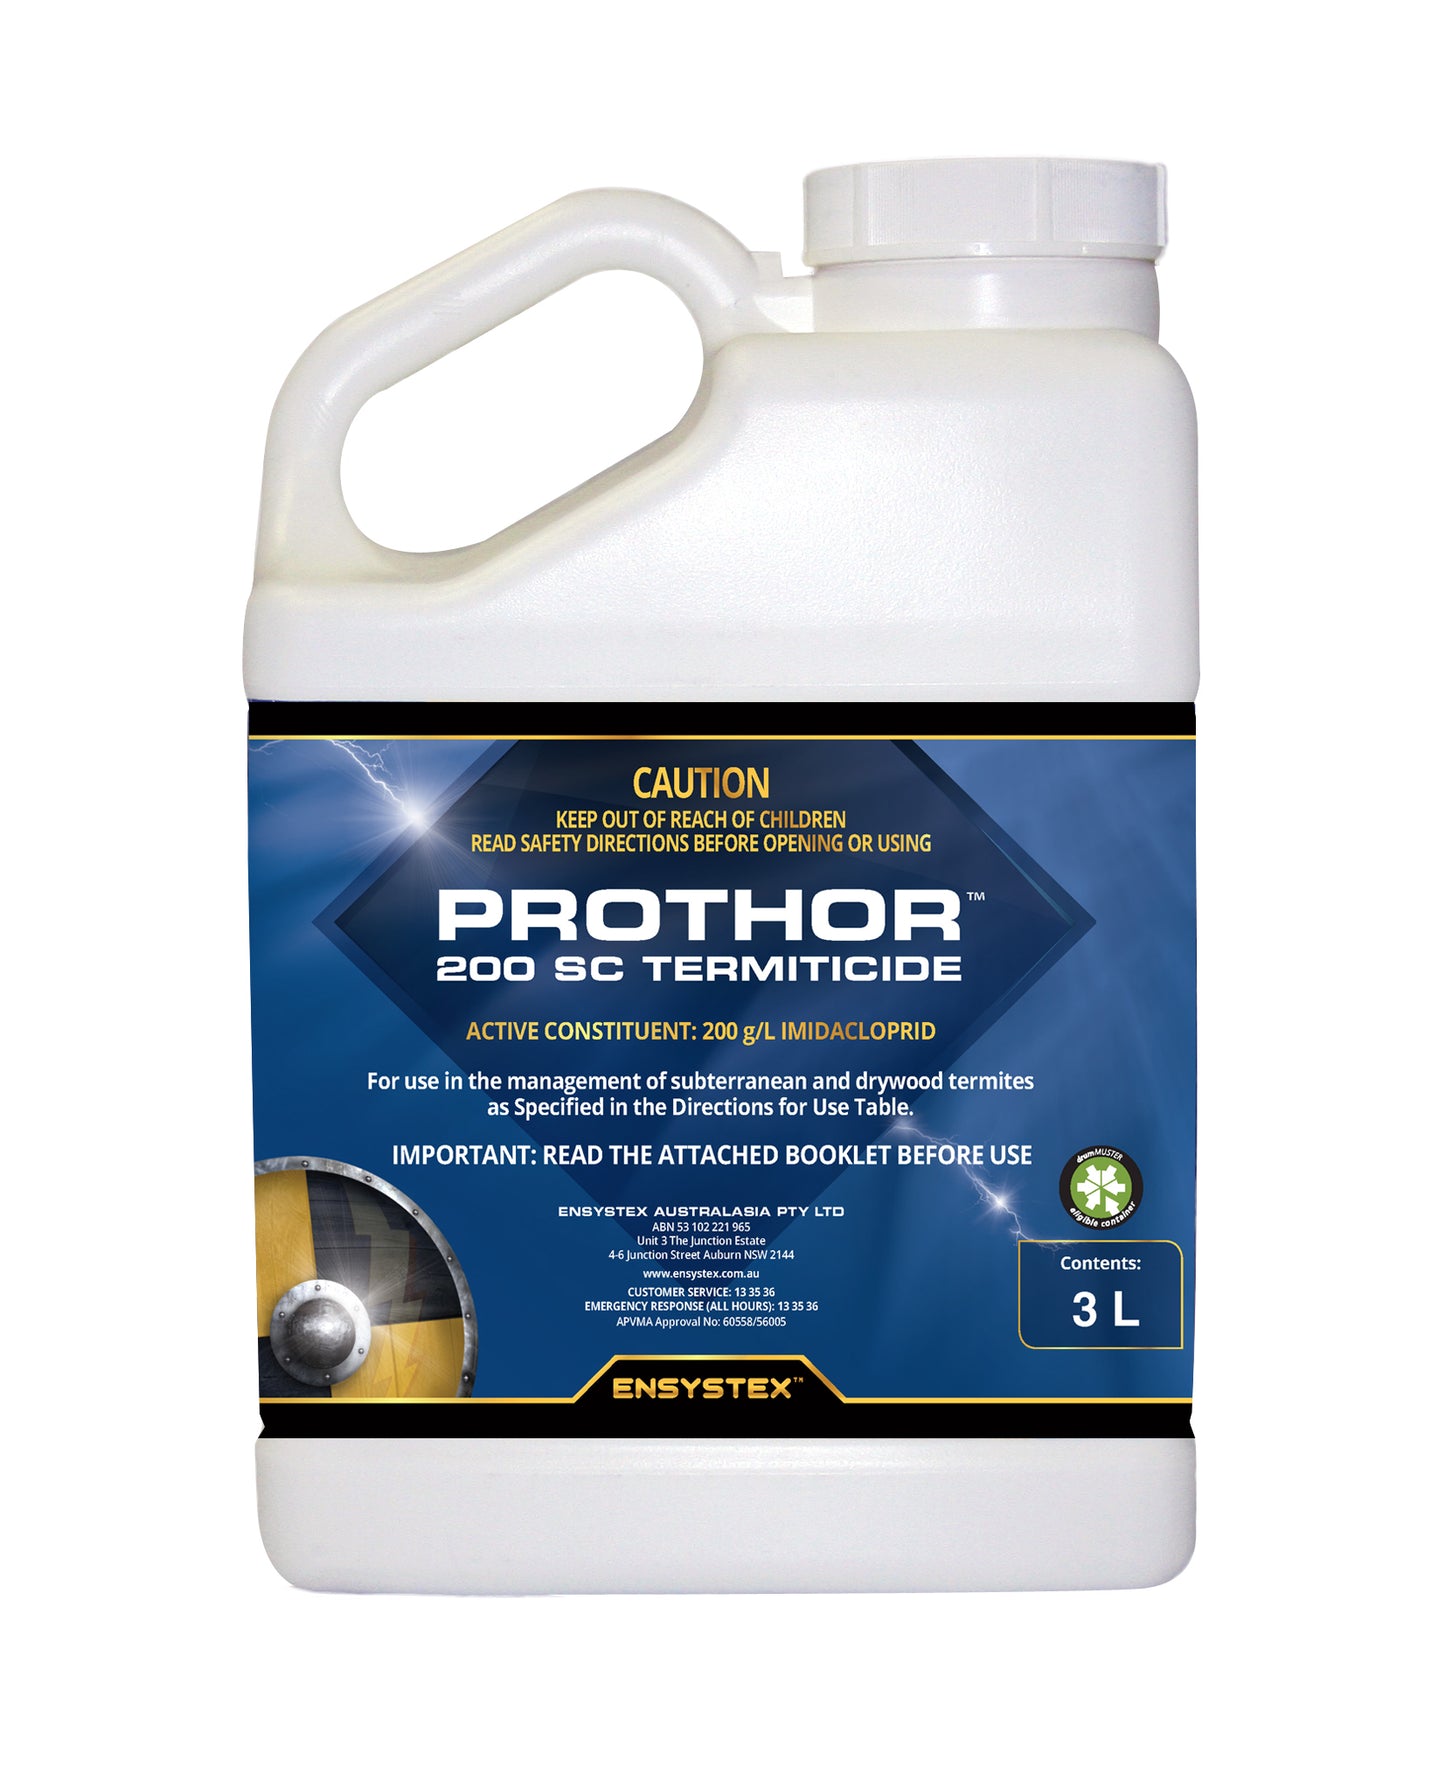 PROTHOR Water-based Termiticide